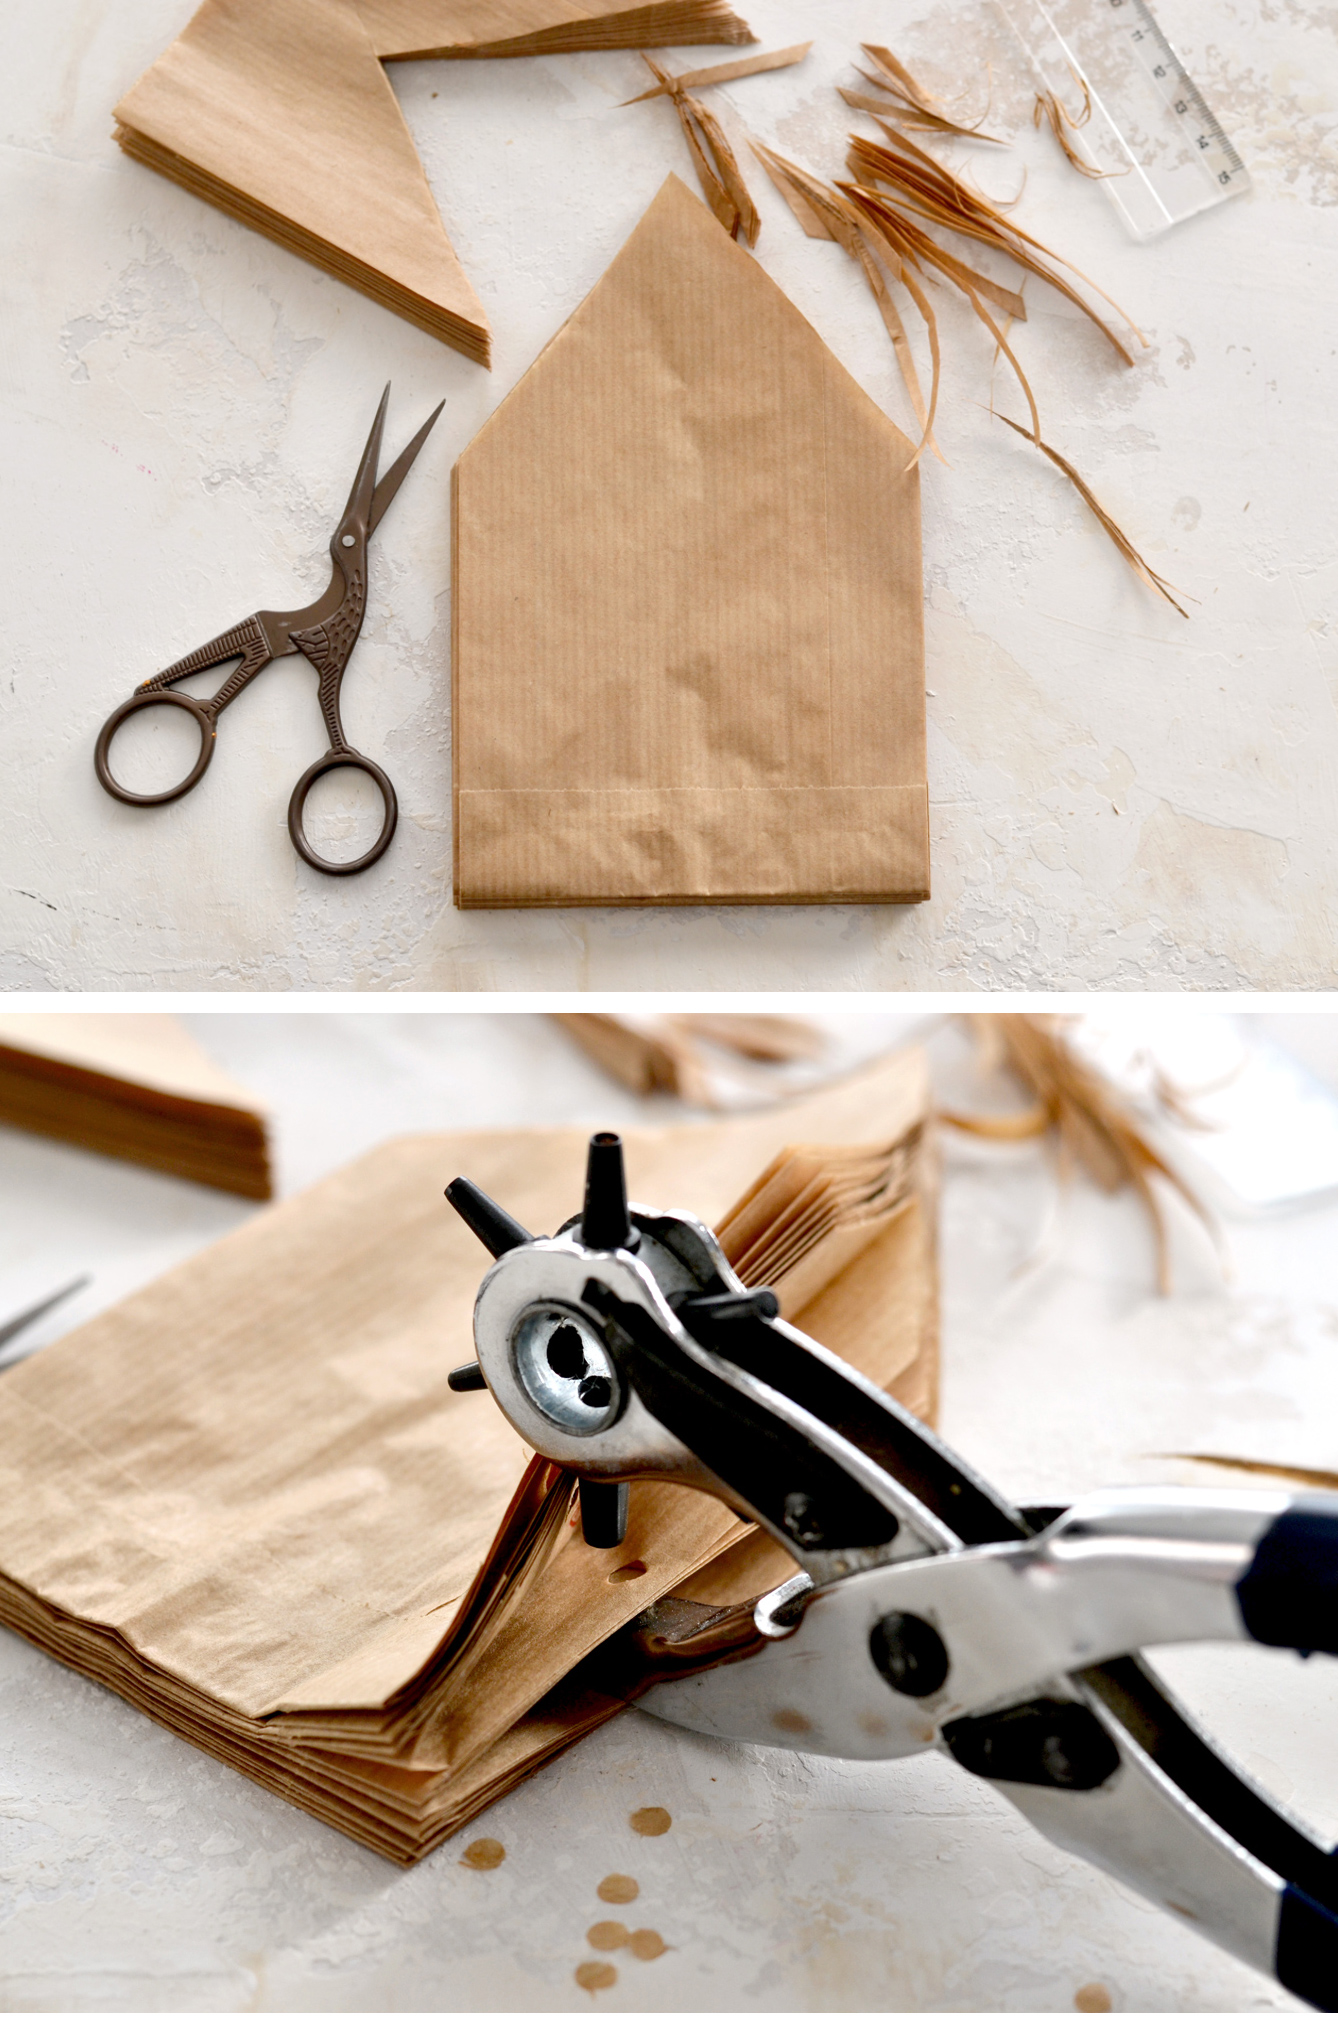 How to cut the first design of the paper bag stars